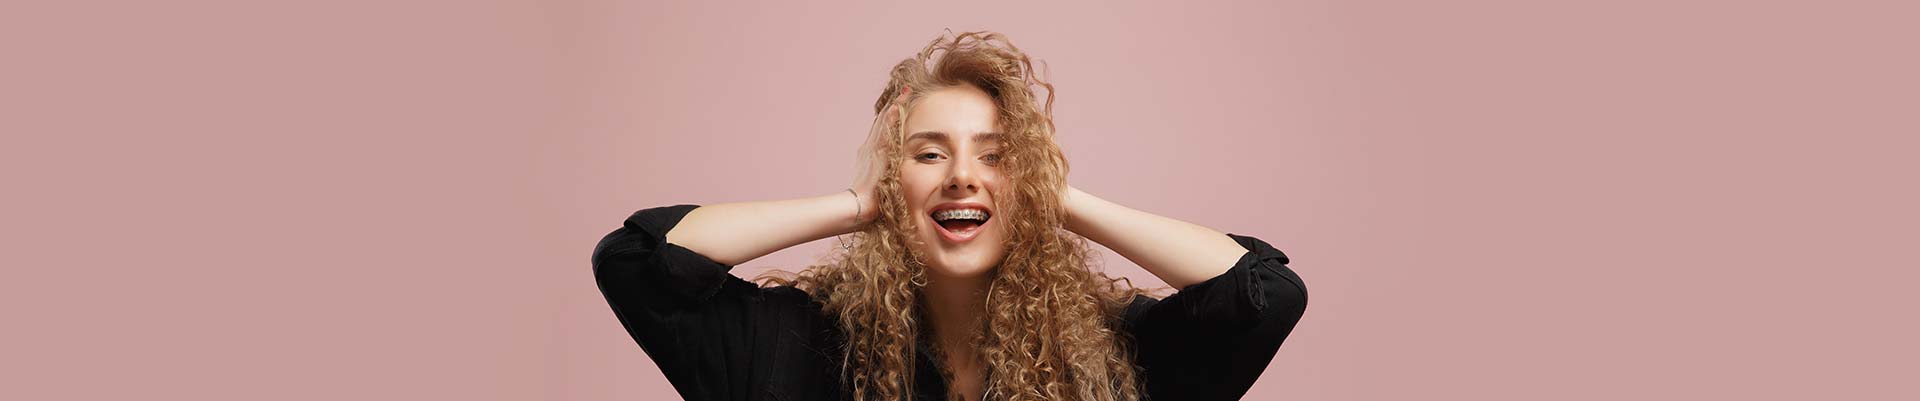 Cheerful beautiful girl with curly hair, braces on her teeth, holds her hands on her head, smiling broadly with her mouth open.